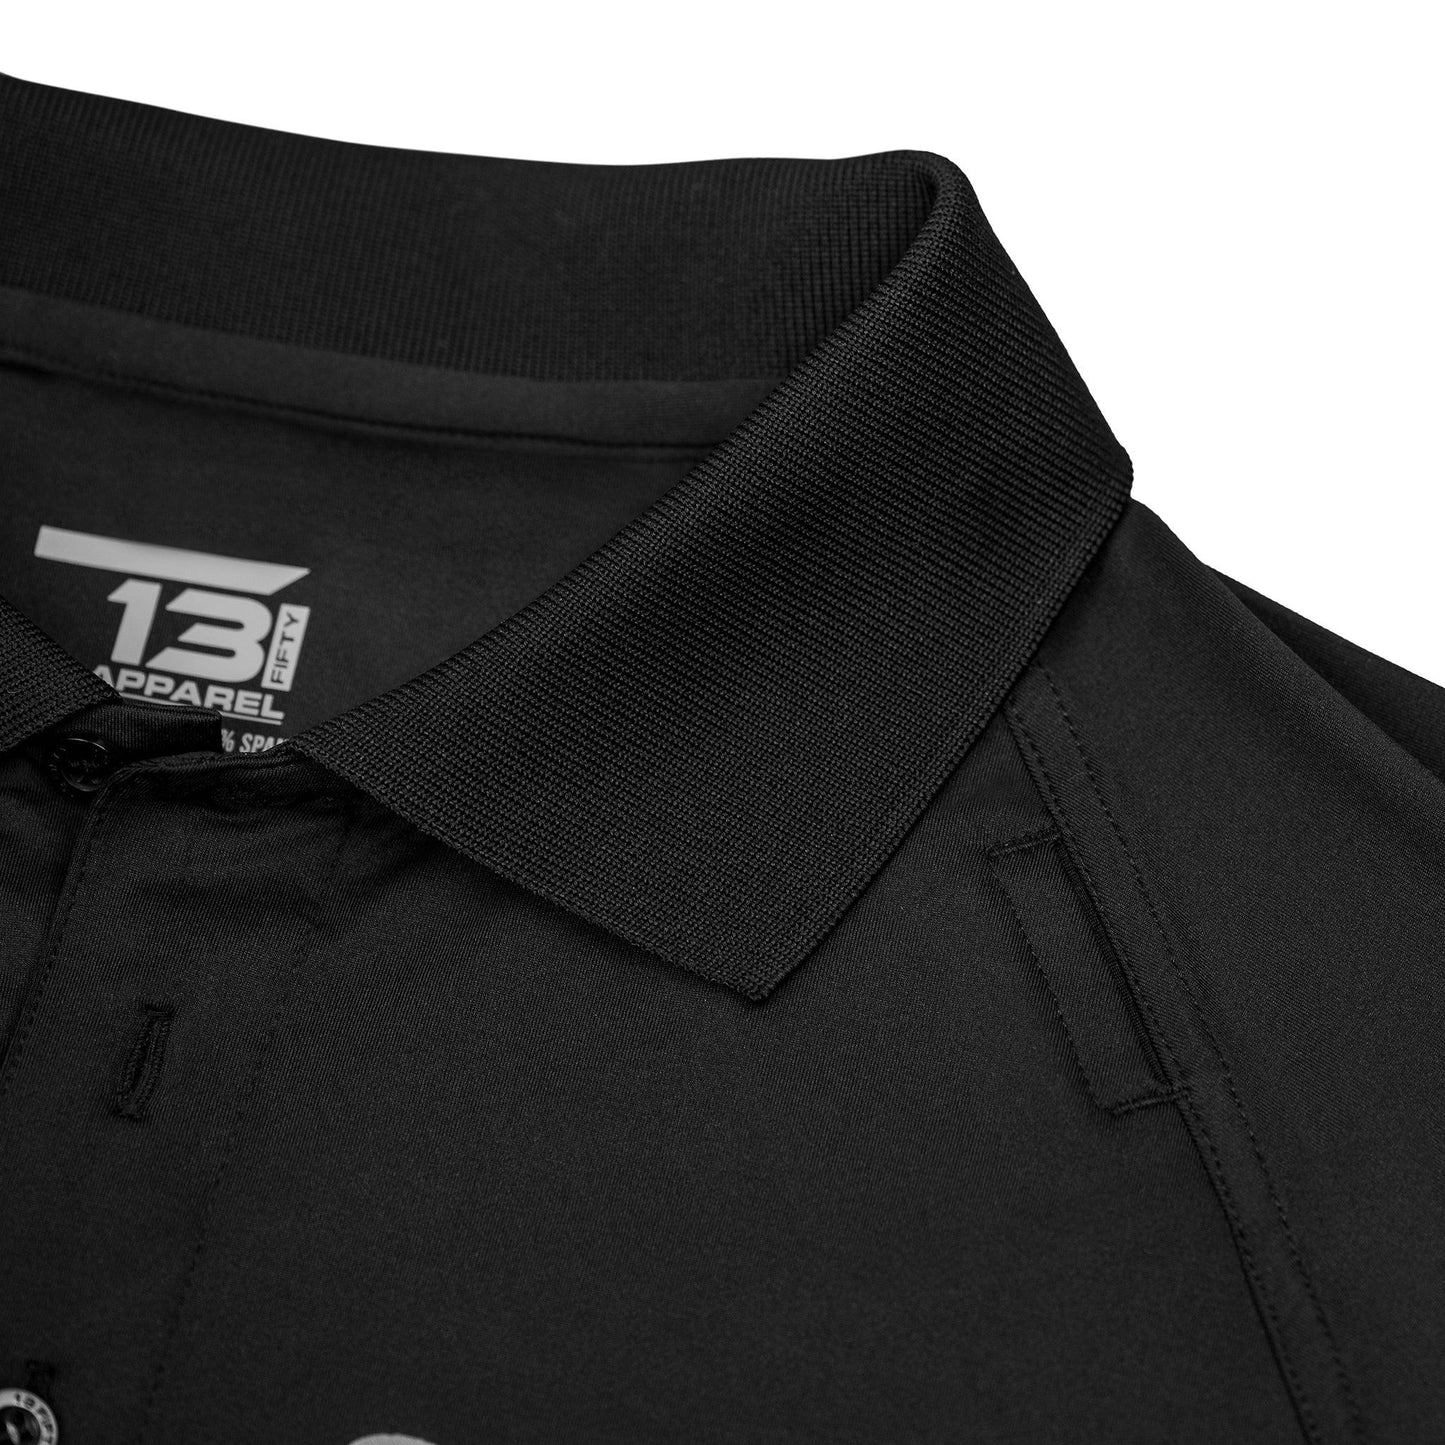 [SHERIFF] Men's Performance Polo [BLK/GRY]-13 Fifty Apparel